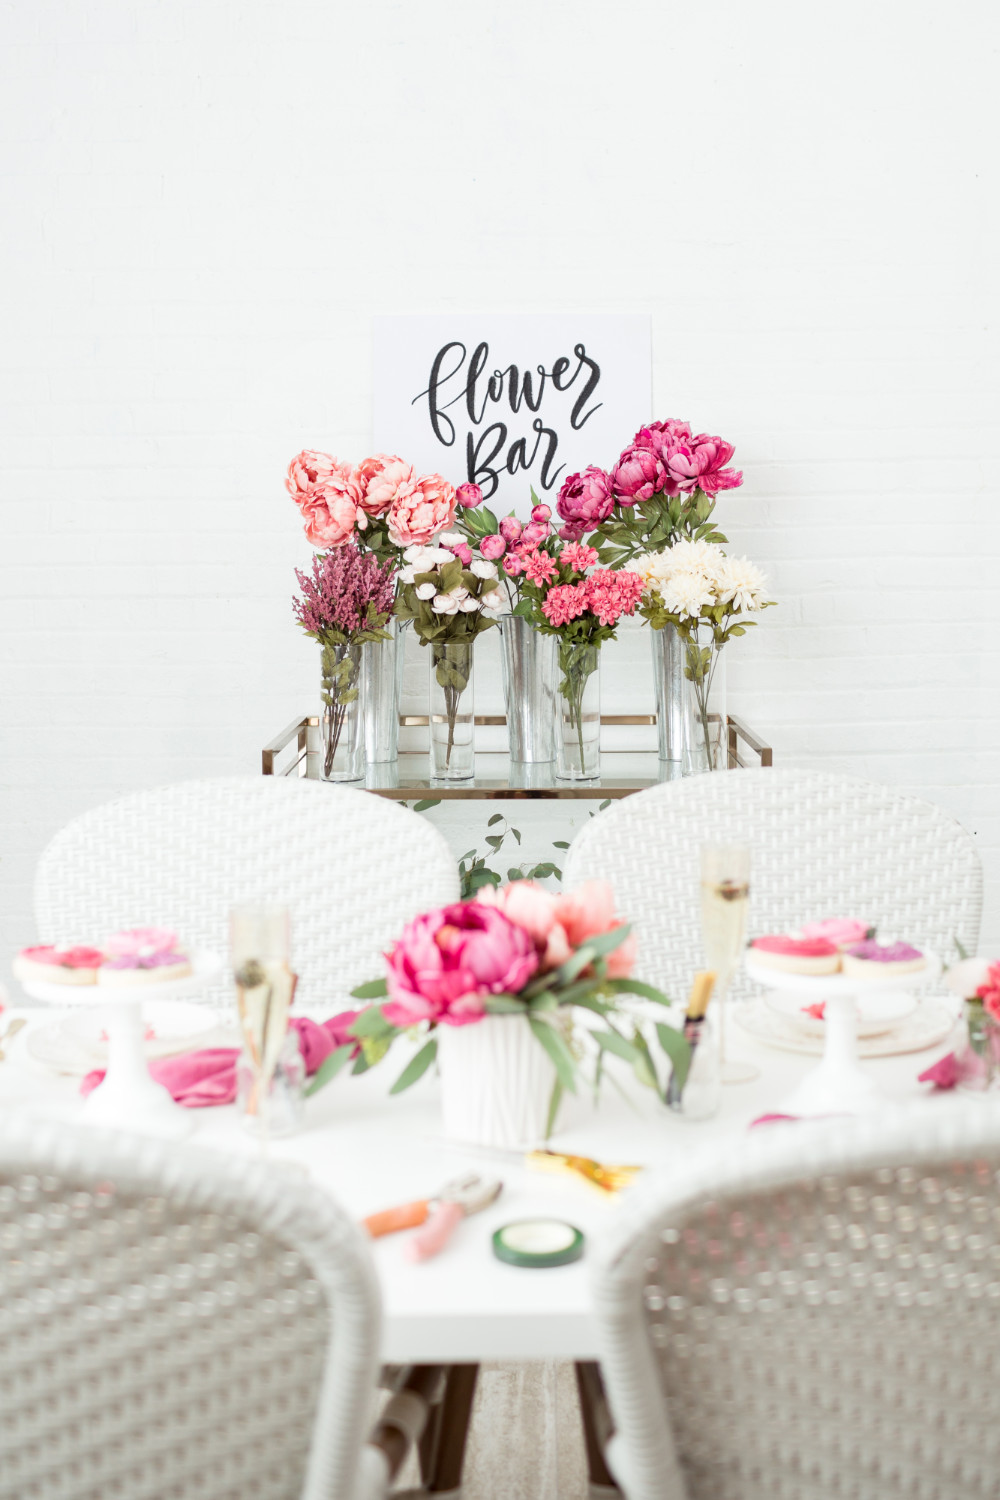 Bridal Shower Decorations: 13 Ways to Pull Off the Perfect Party